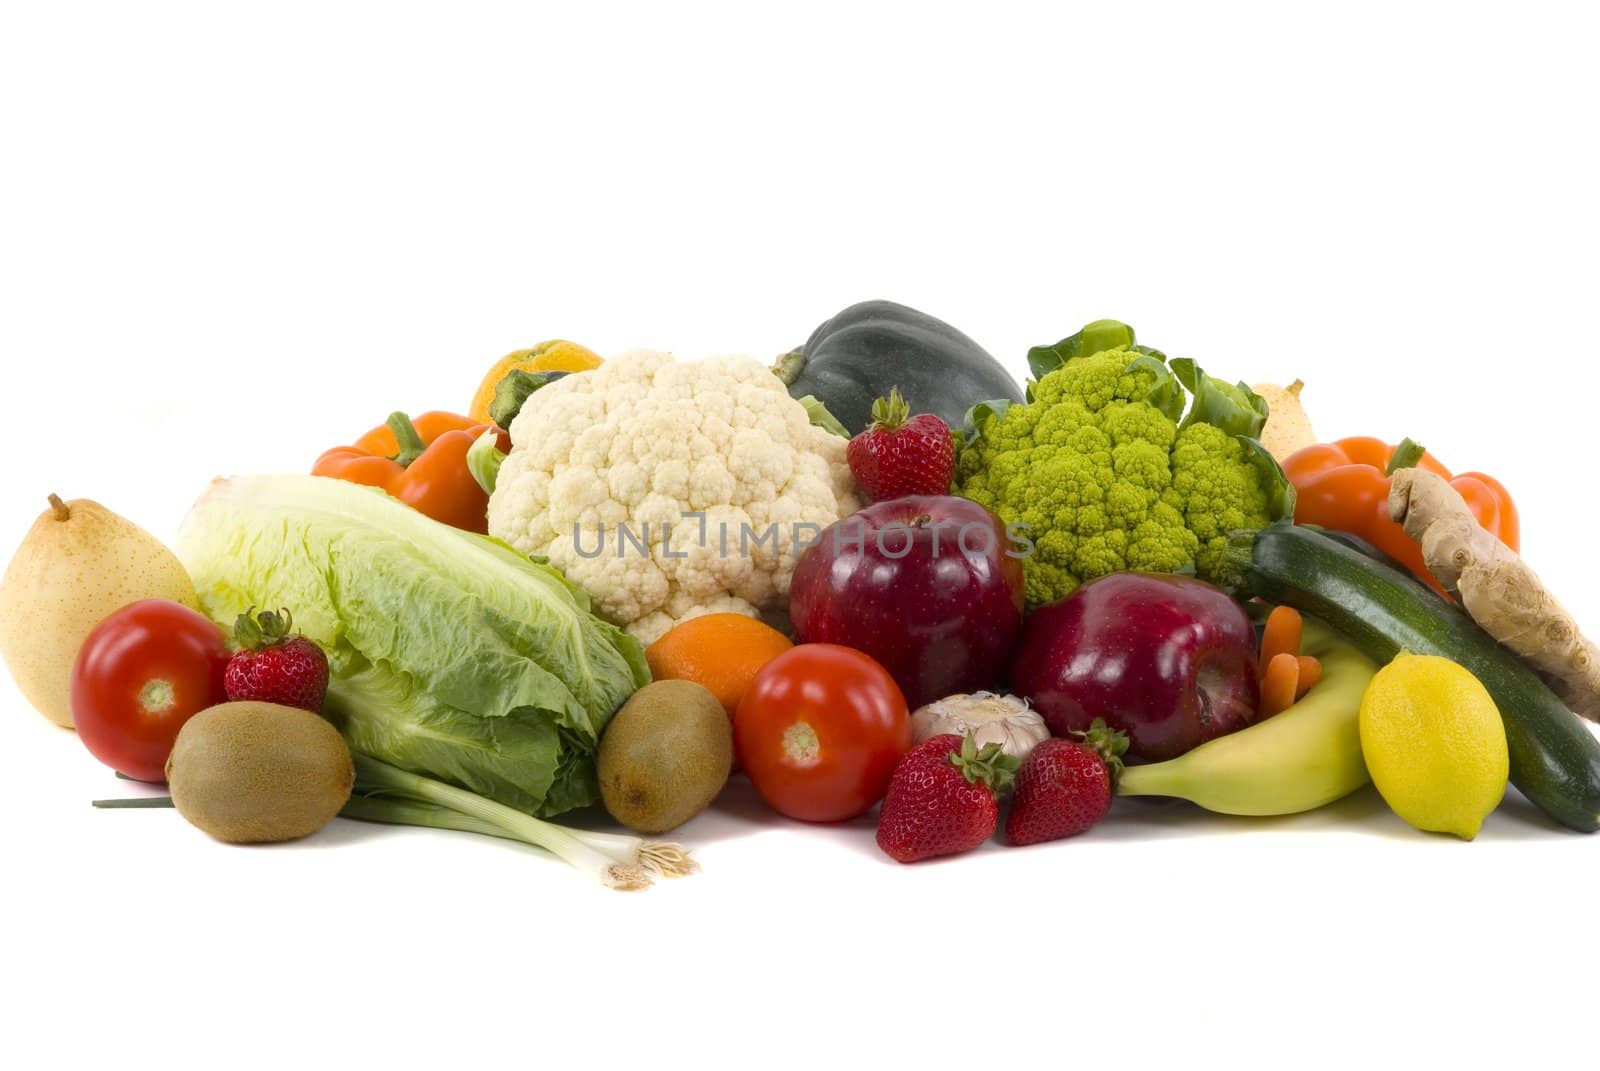 Different kinds of vegetables and fruits on white background